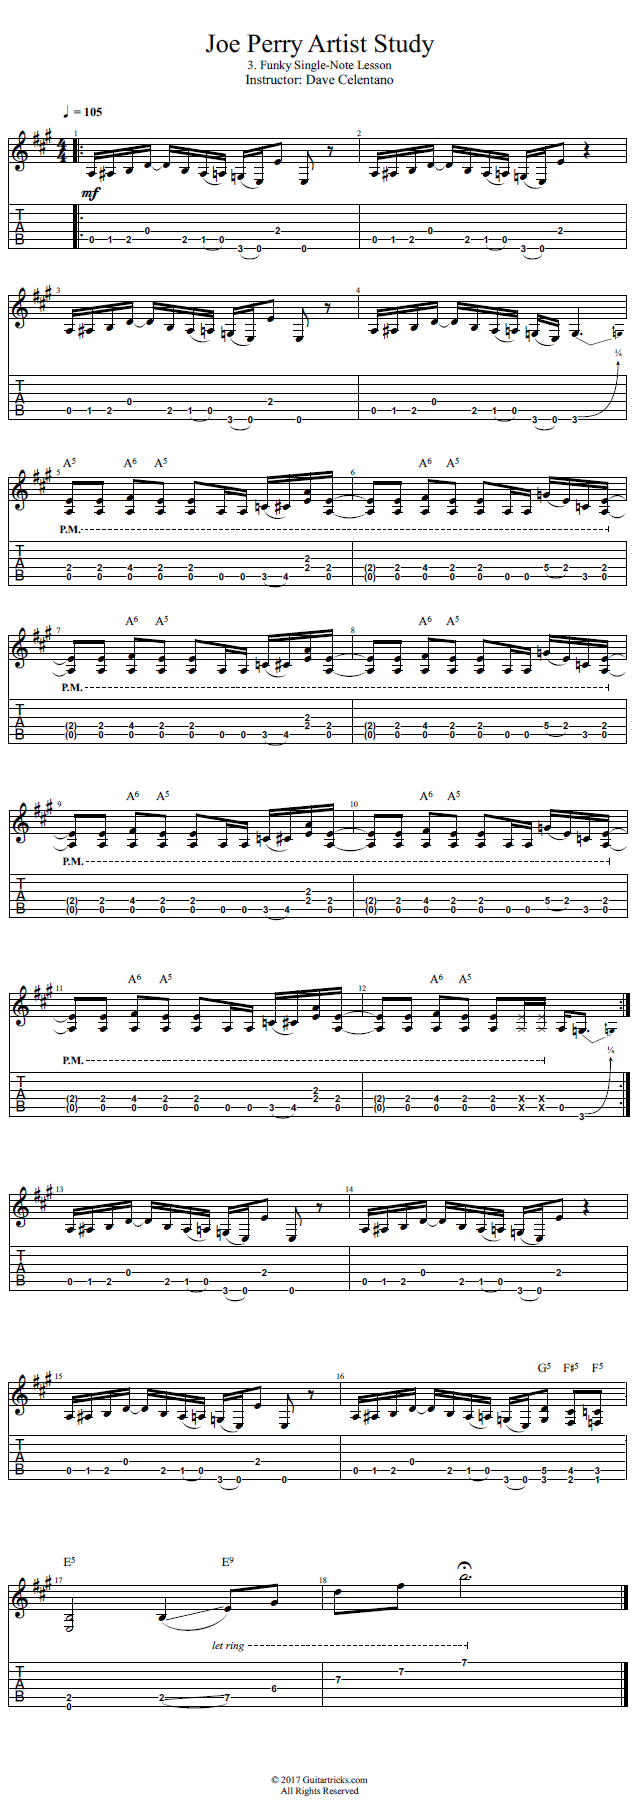 Funky Single-Note Lesson song notation